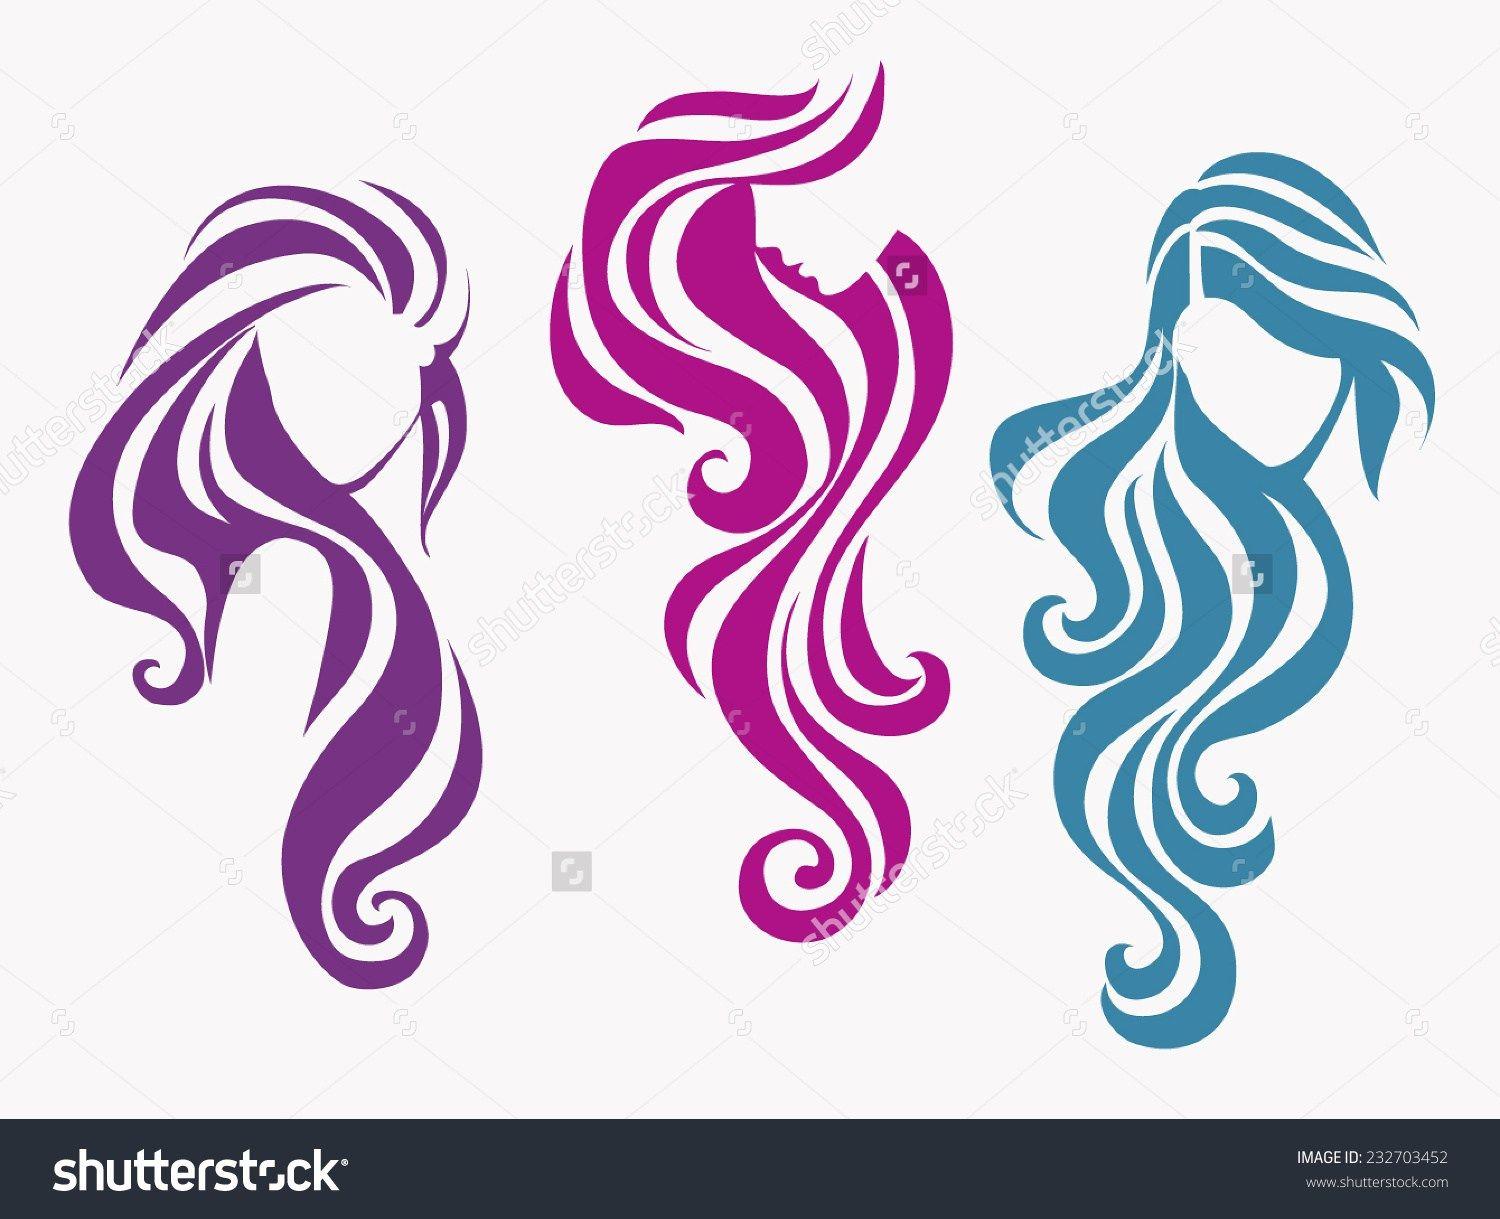 Lady with Flowing Hair Logo - Logo Hair Flowing Lady